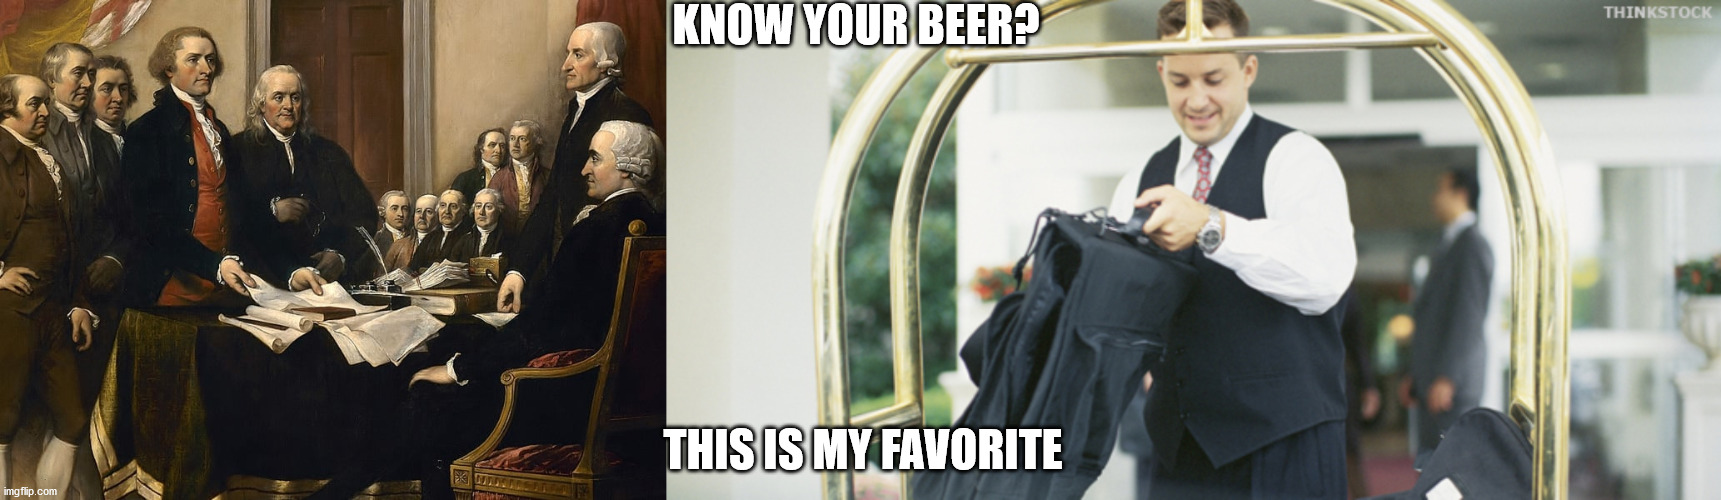 due to the overwhelming response I am posting just one more Beer Knowledge. What I prefer to drink when I drink beer | KNOW YOUR BEER? THIS IS MY FAVORITE | image tagged in beer | made w/ Imgflip meme maker